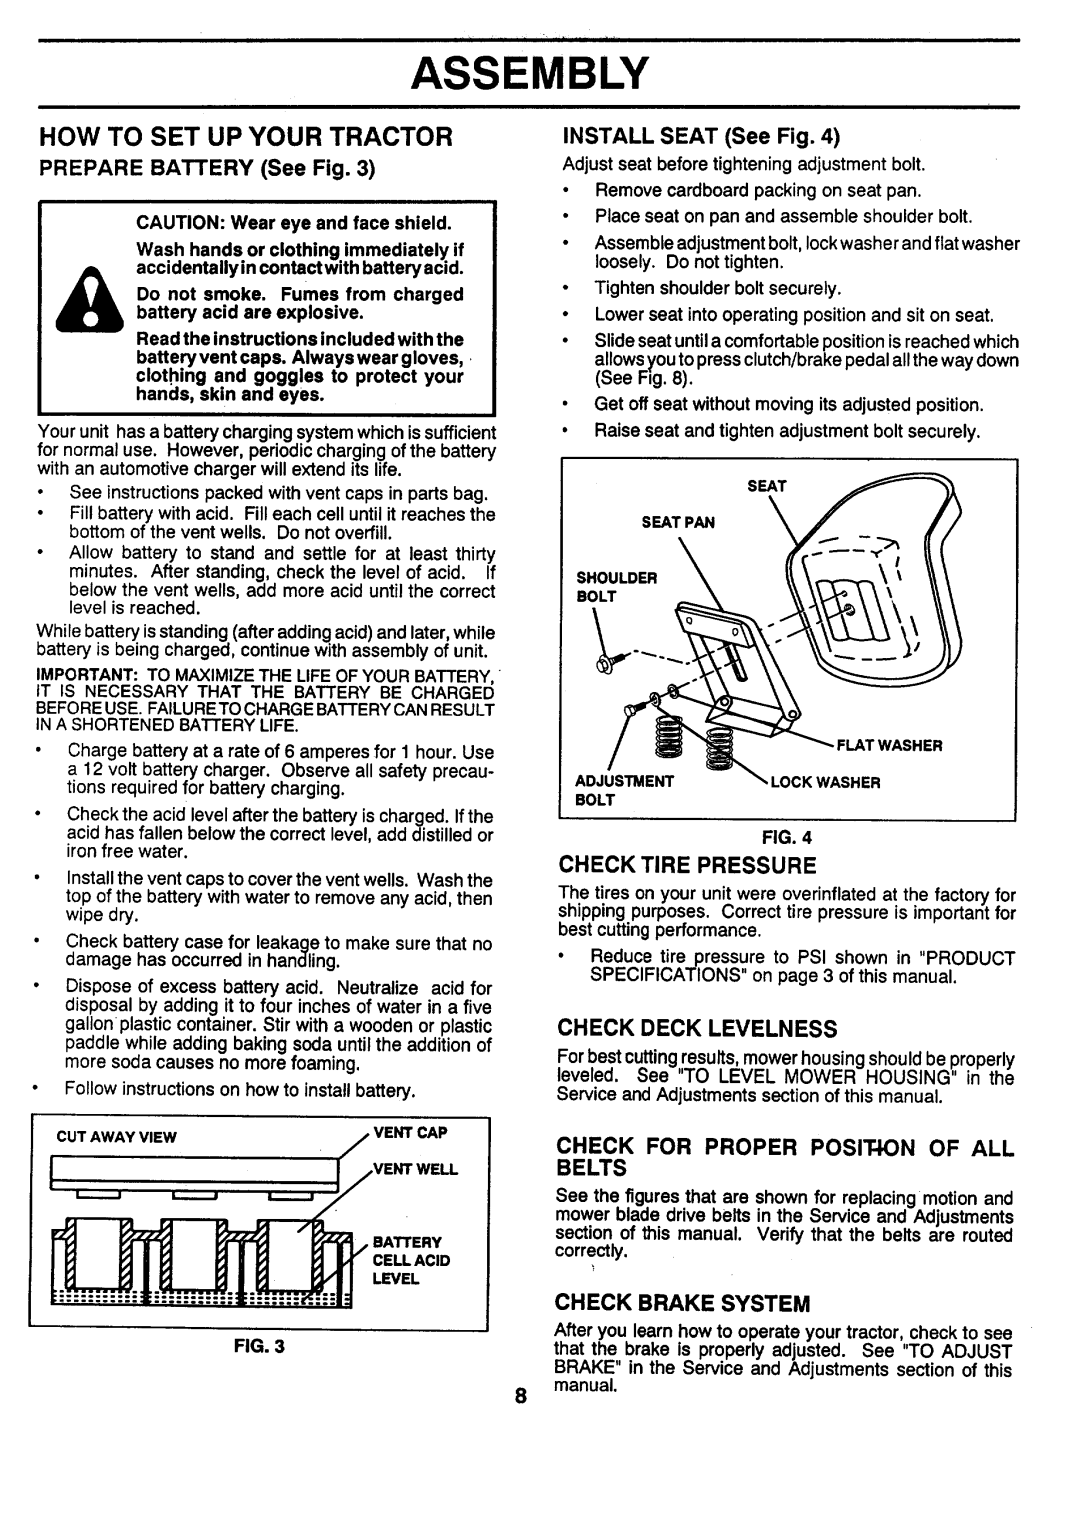 Sears 917.257462 manual Assembly, How To Set Up Your Tractor, Checktire Pressure, Check Deck Levelness, Check Brake System 